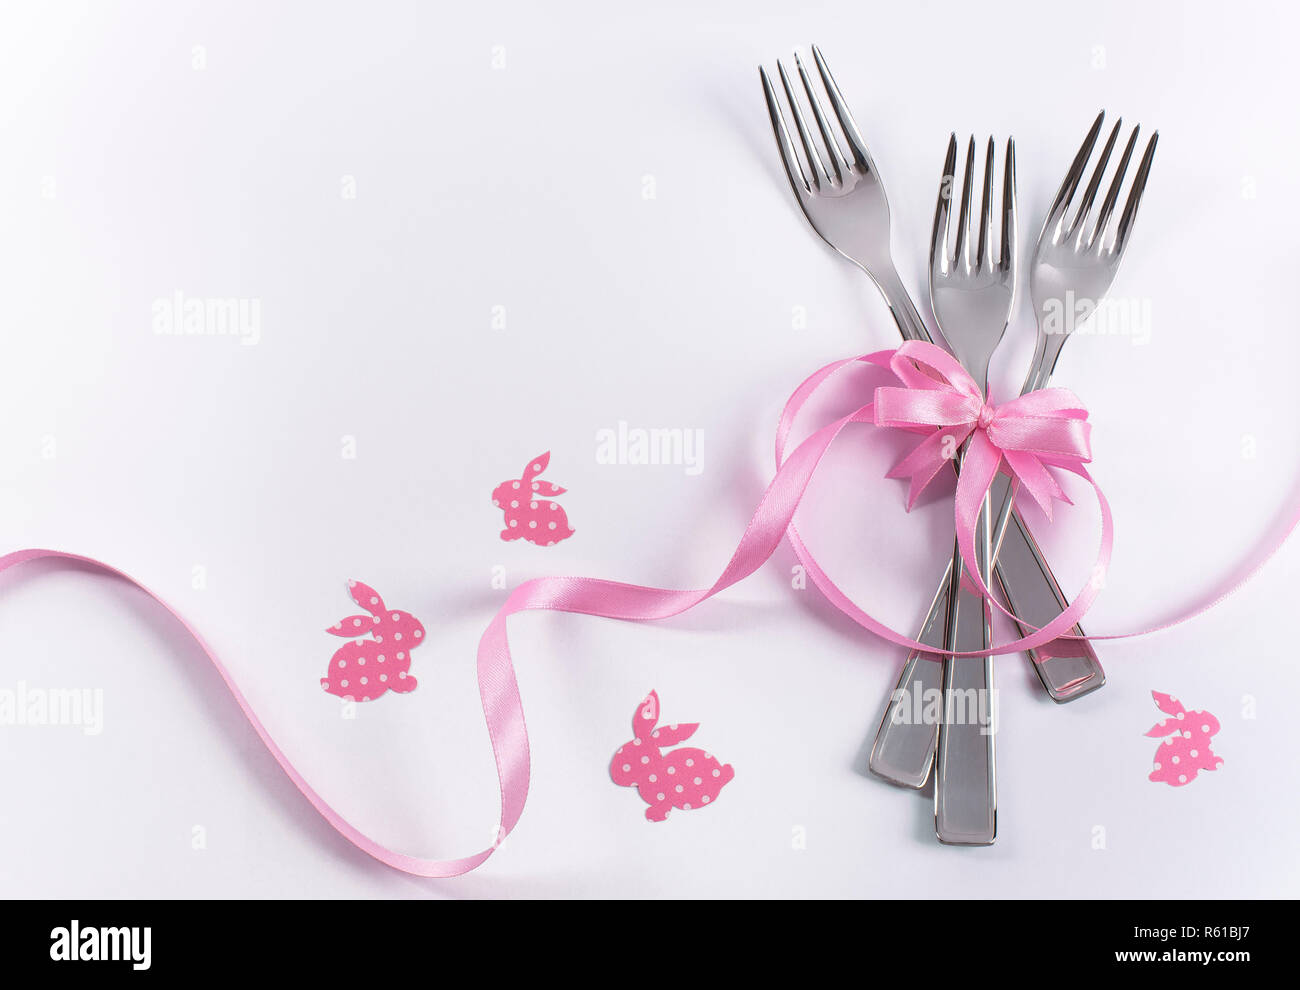 Silverware on white with pink ribbon as background for menu and invitation Stock Photo